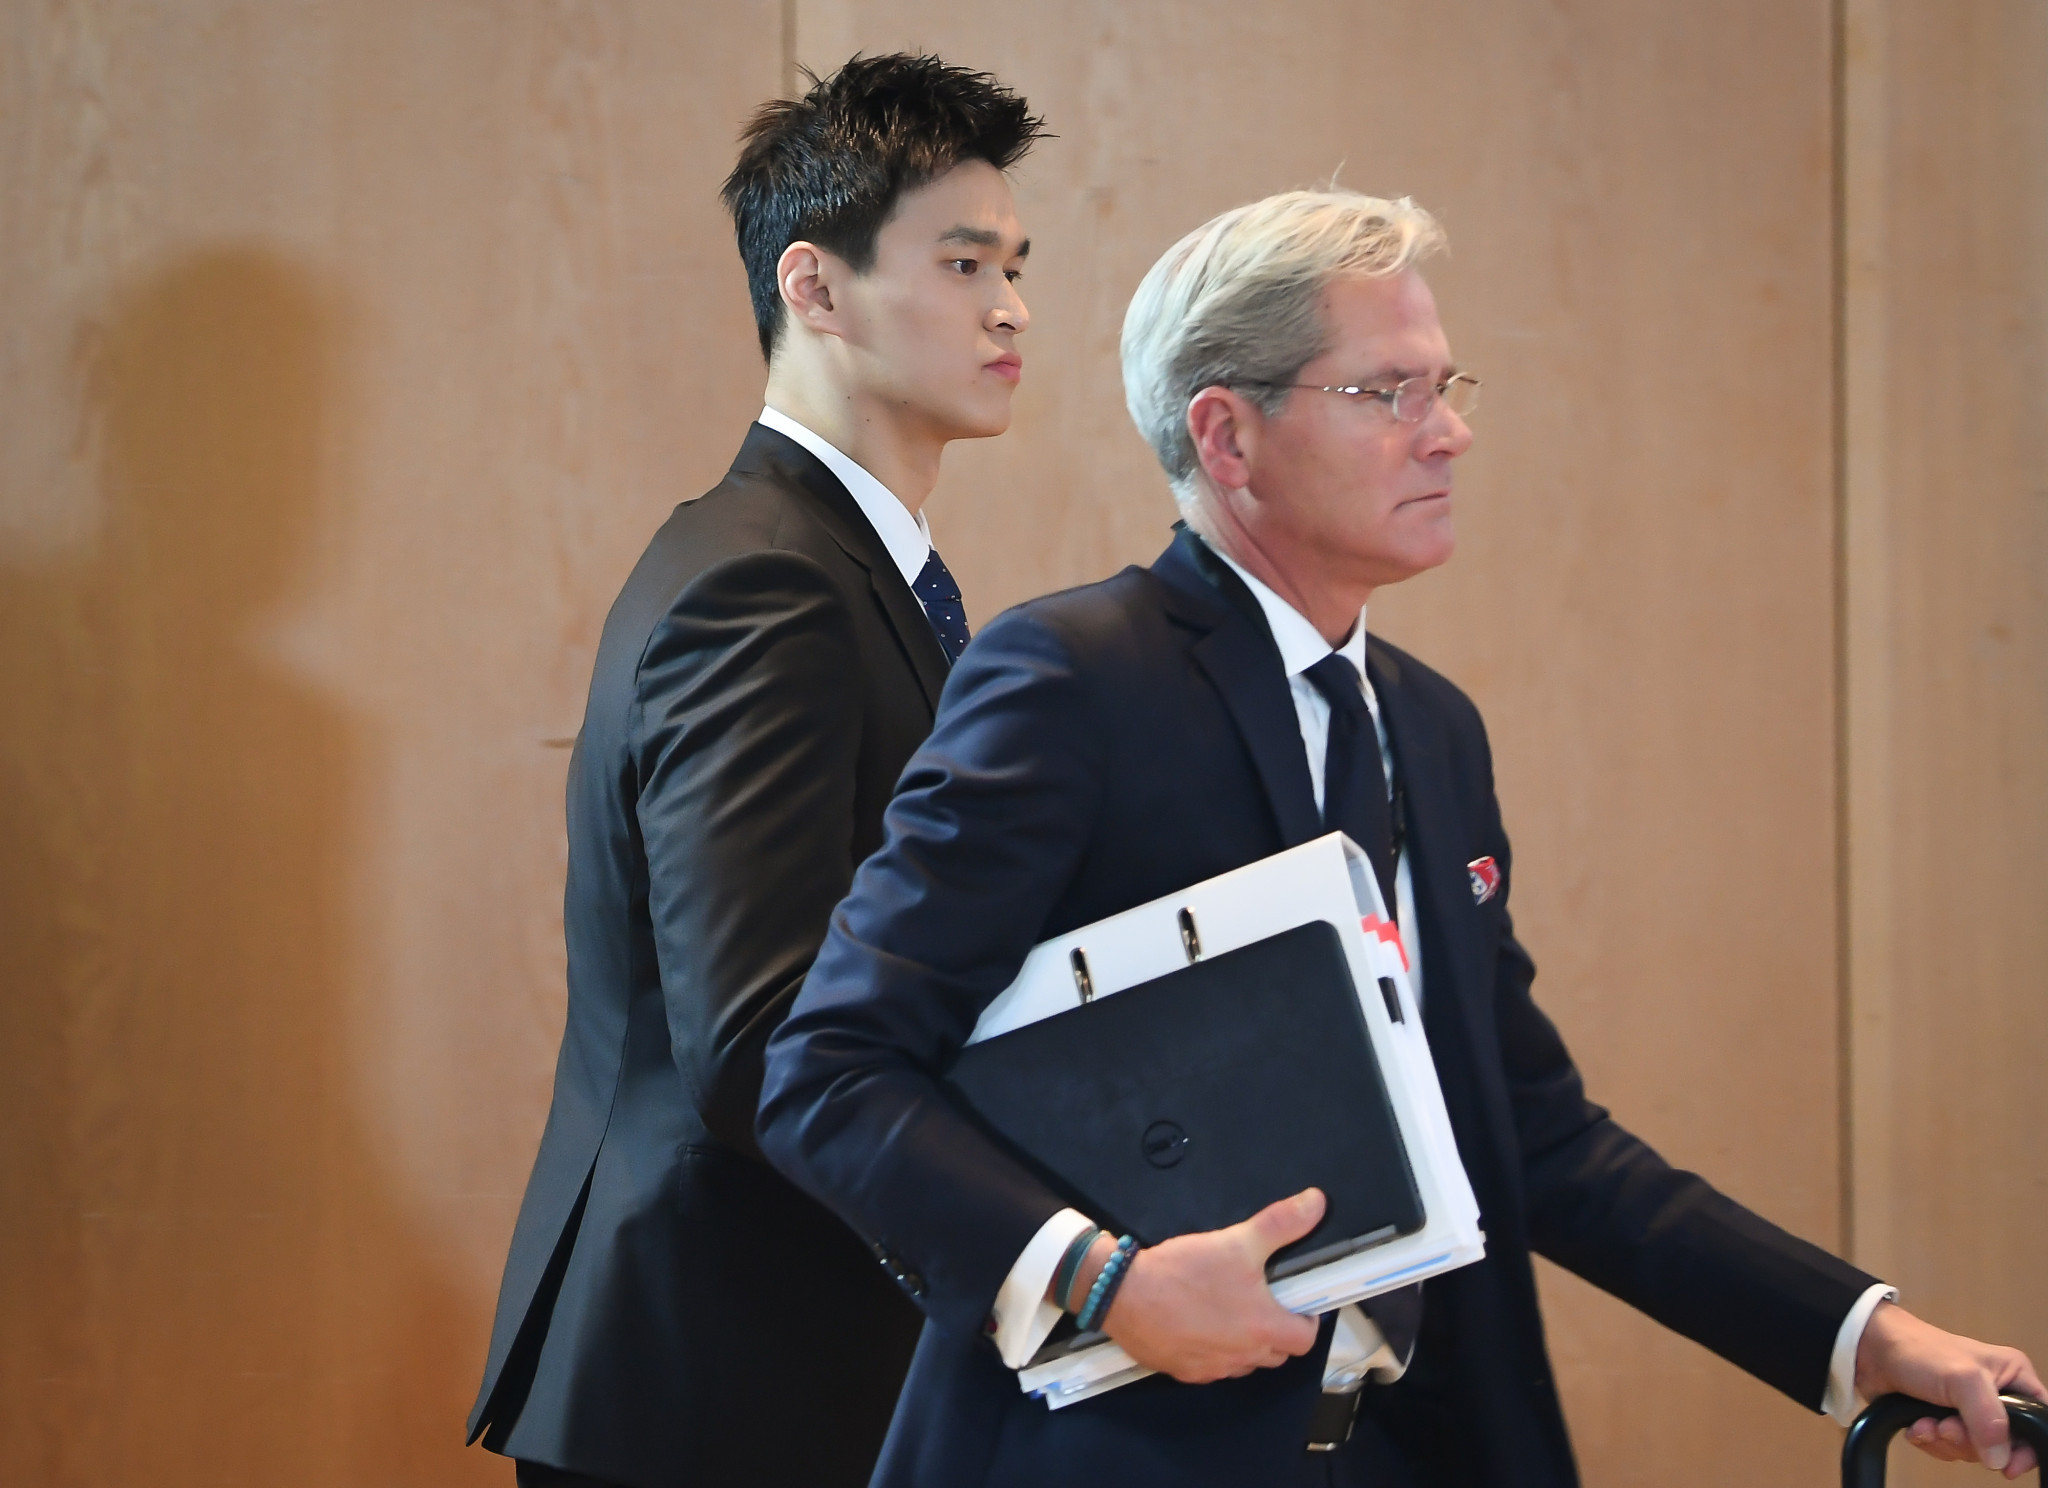 Sun Yang and his legal team argued the testers did not have the proper accreditation ©Getty Images